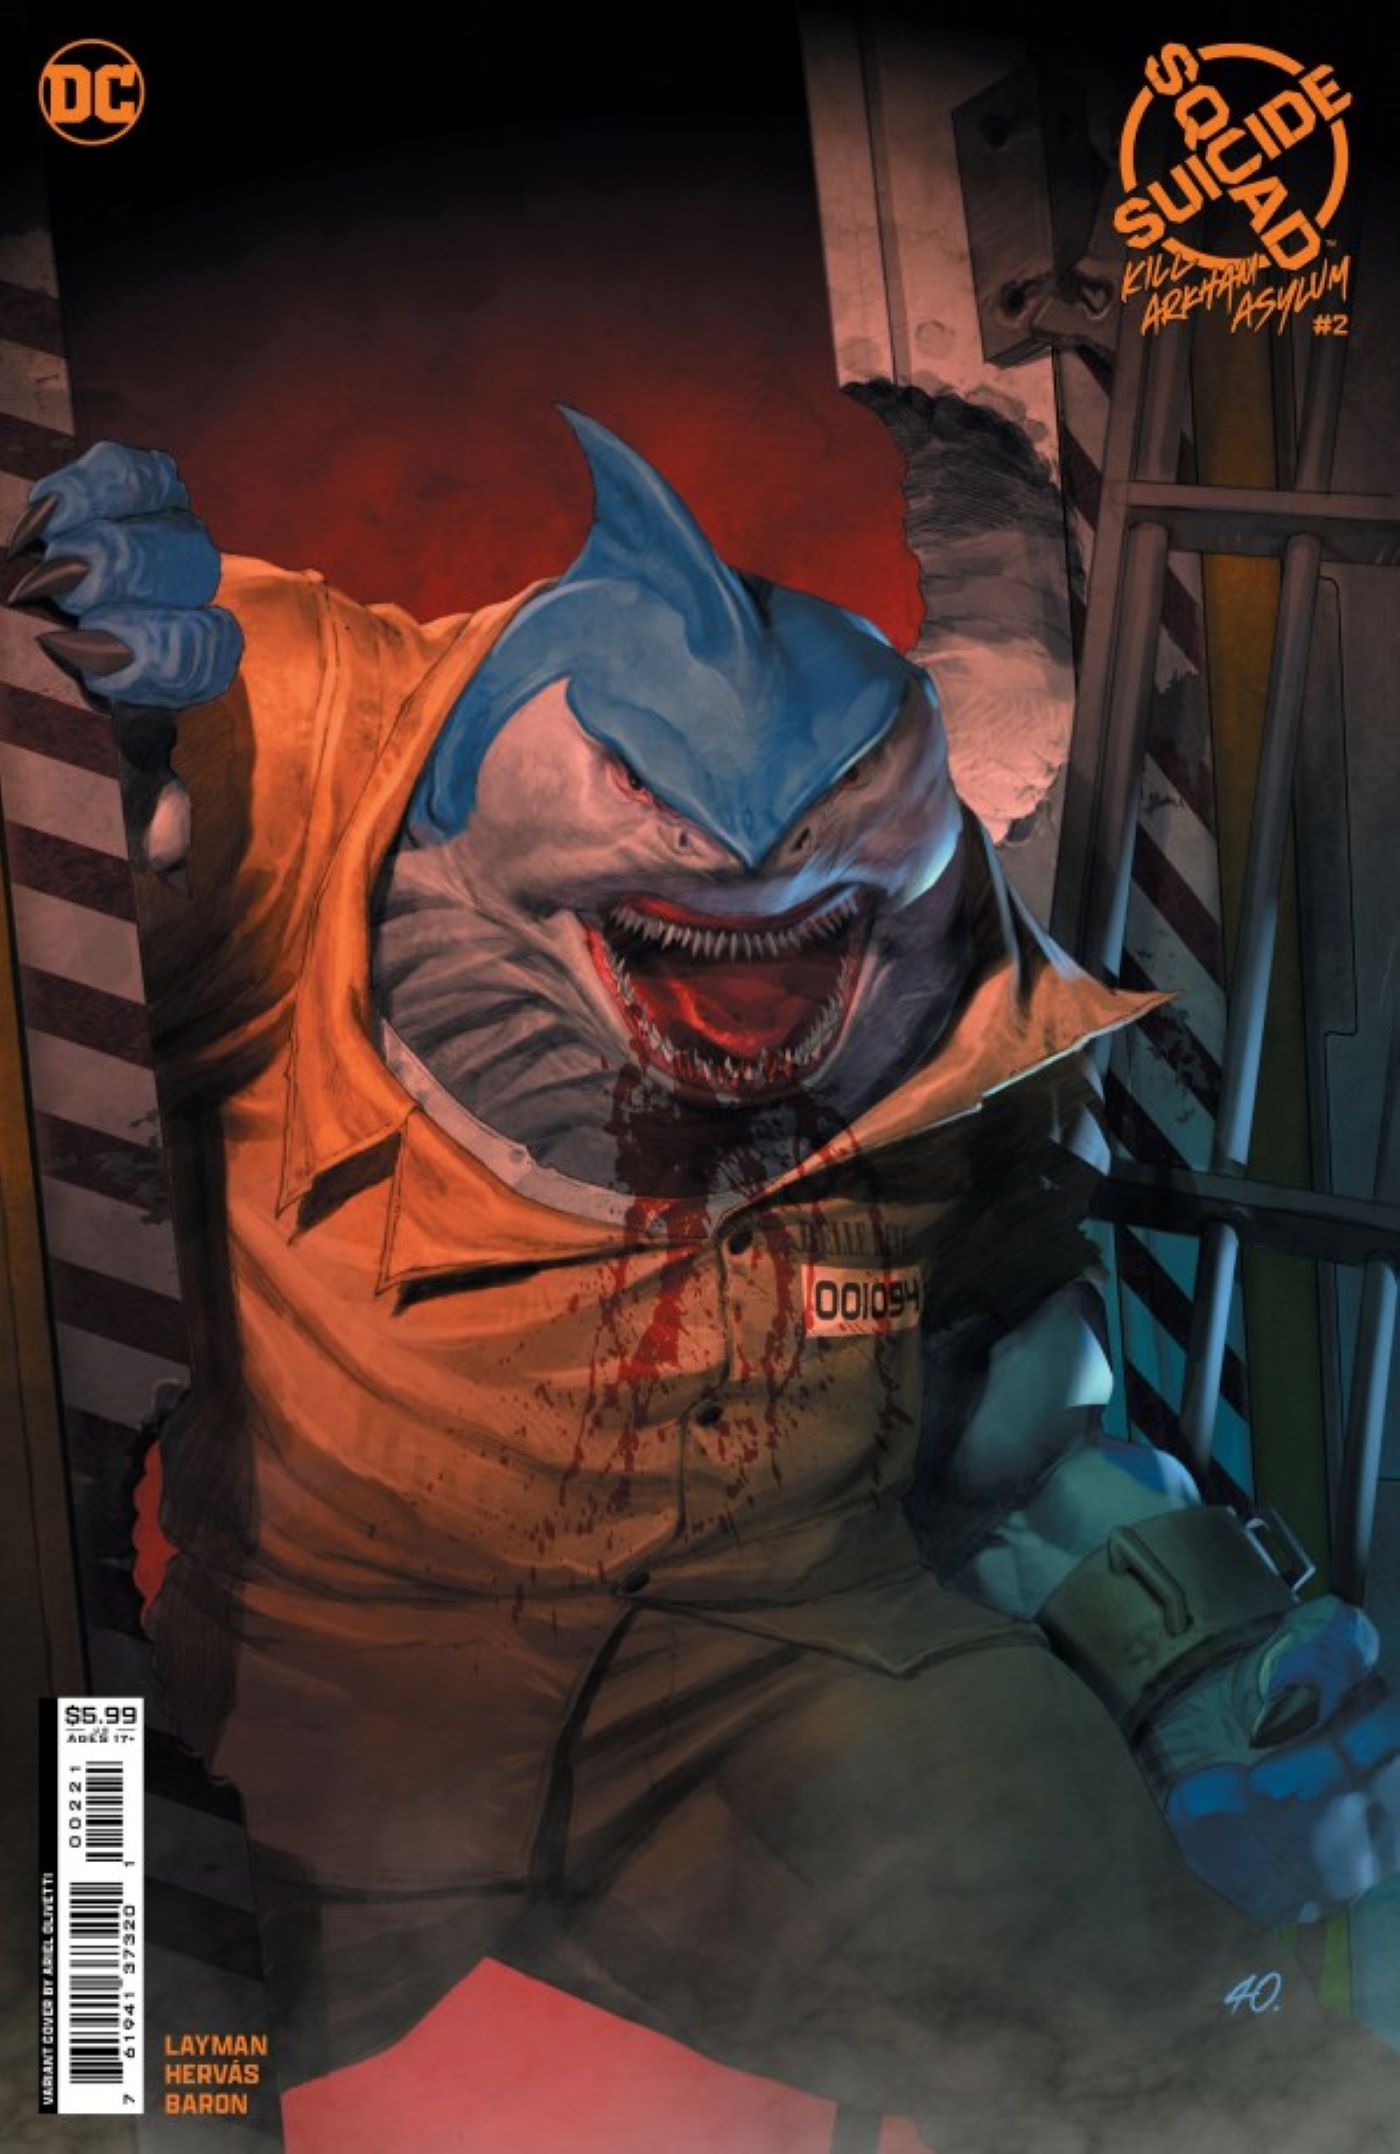 Suicide Squad Kill Arkham Asylum #2 featuring King Shark on the variant cover.